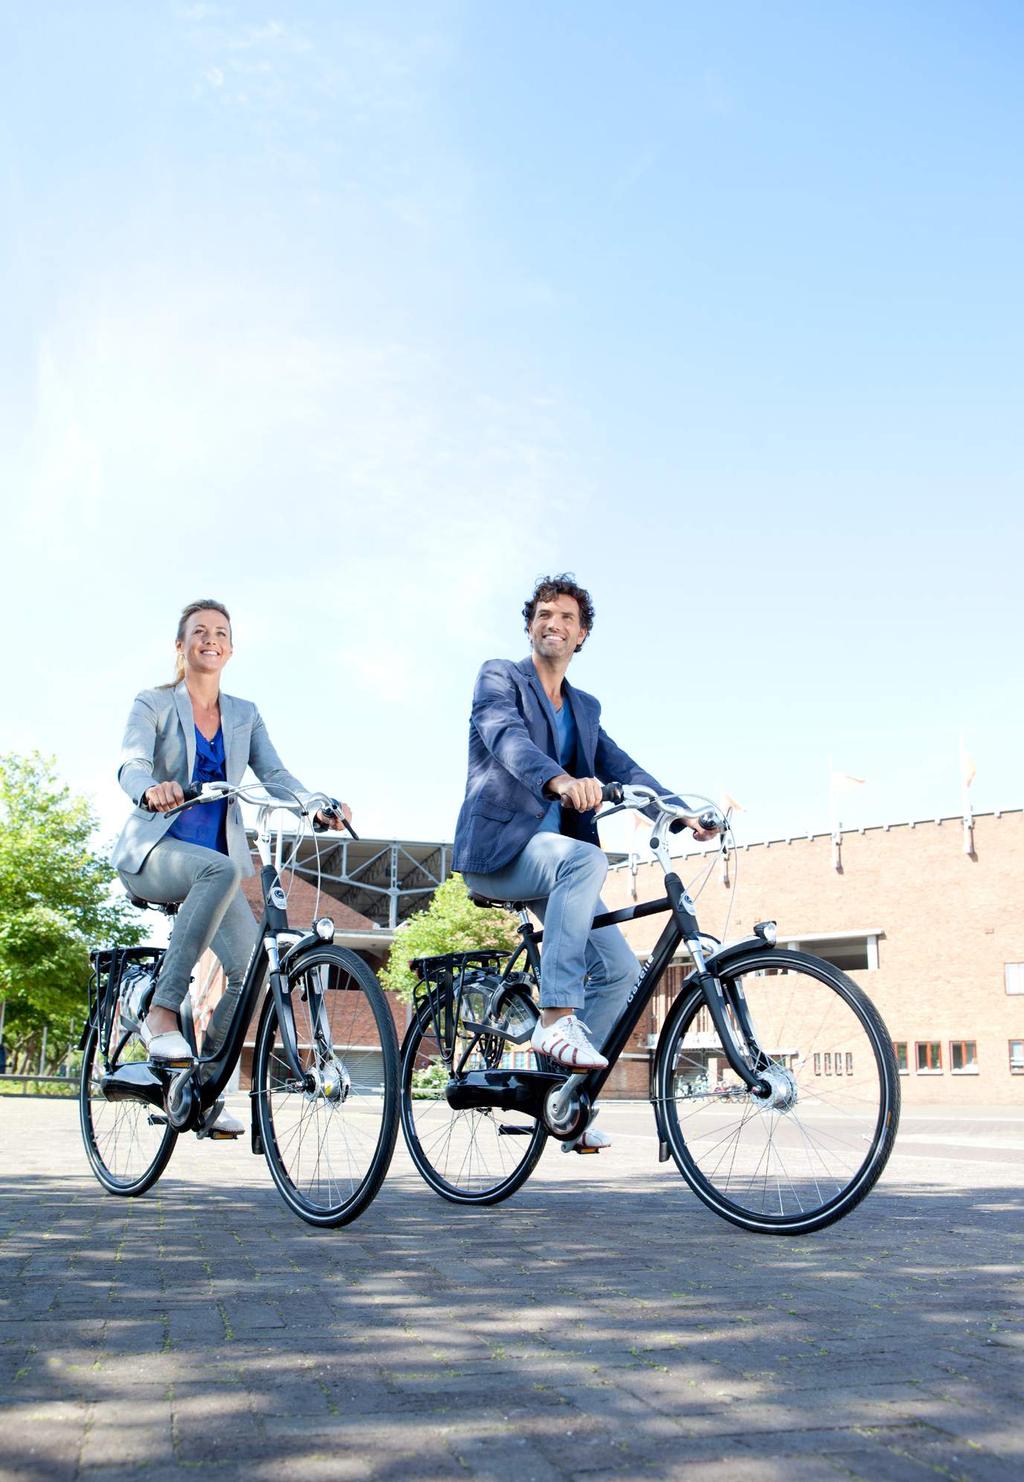 10 11 CITY COMFORT A CONSCIOUS CHOICE With an all-round urban or trekking bike you will be opting for a versatile means of transport, whether you are doing day-to-day shopping, commuting to and from